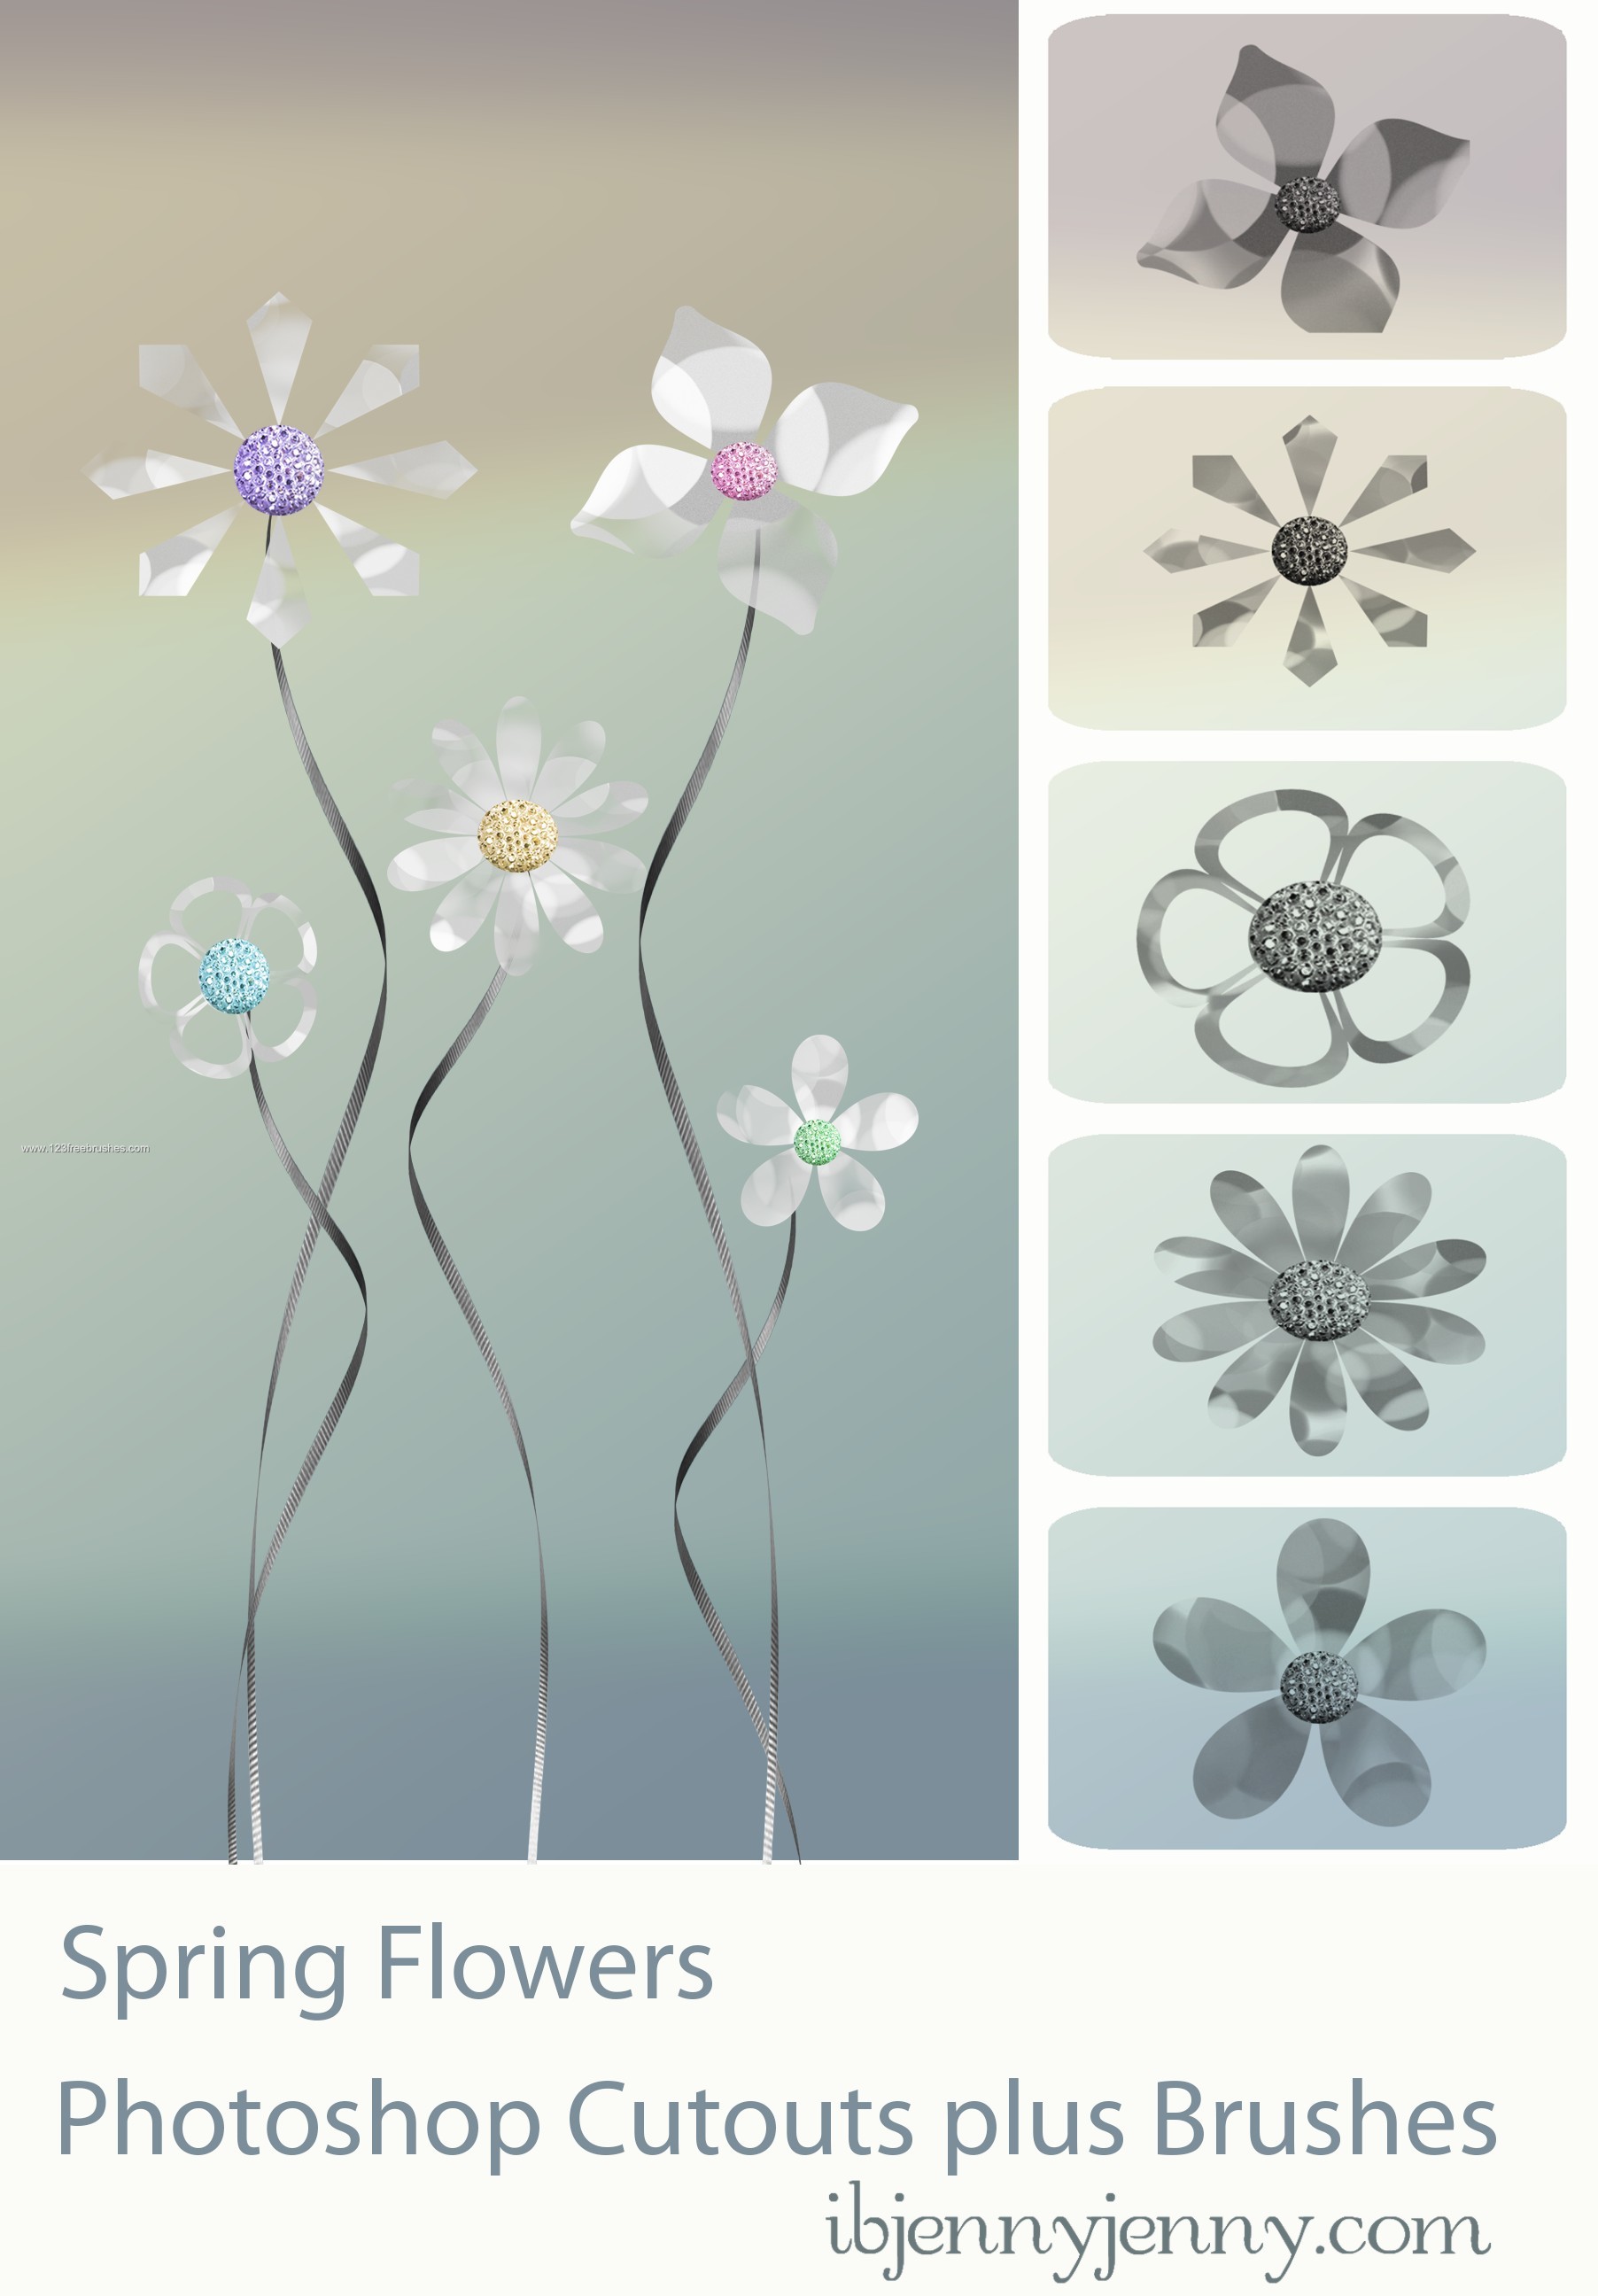 Spring Flower and Cutouts